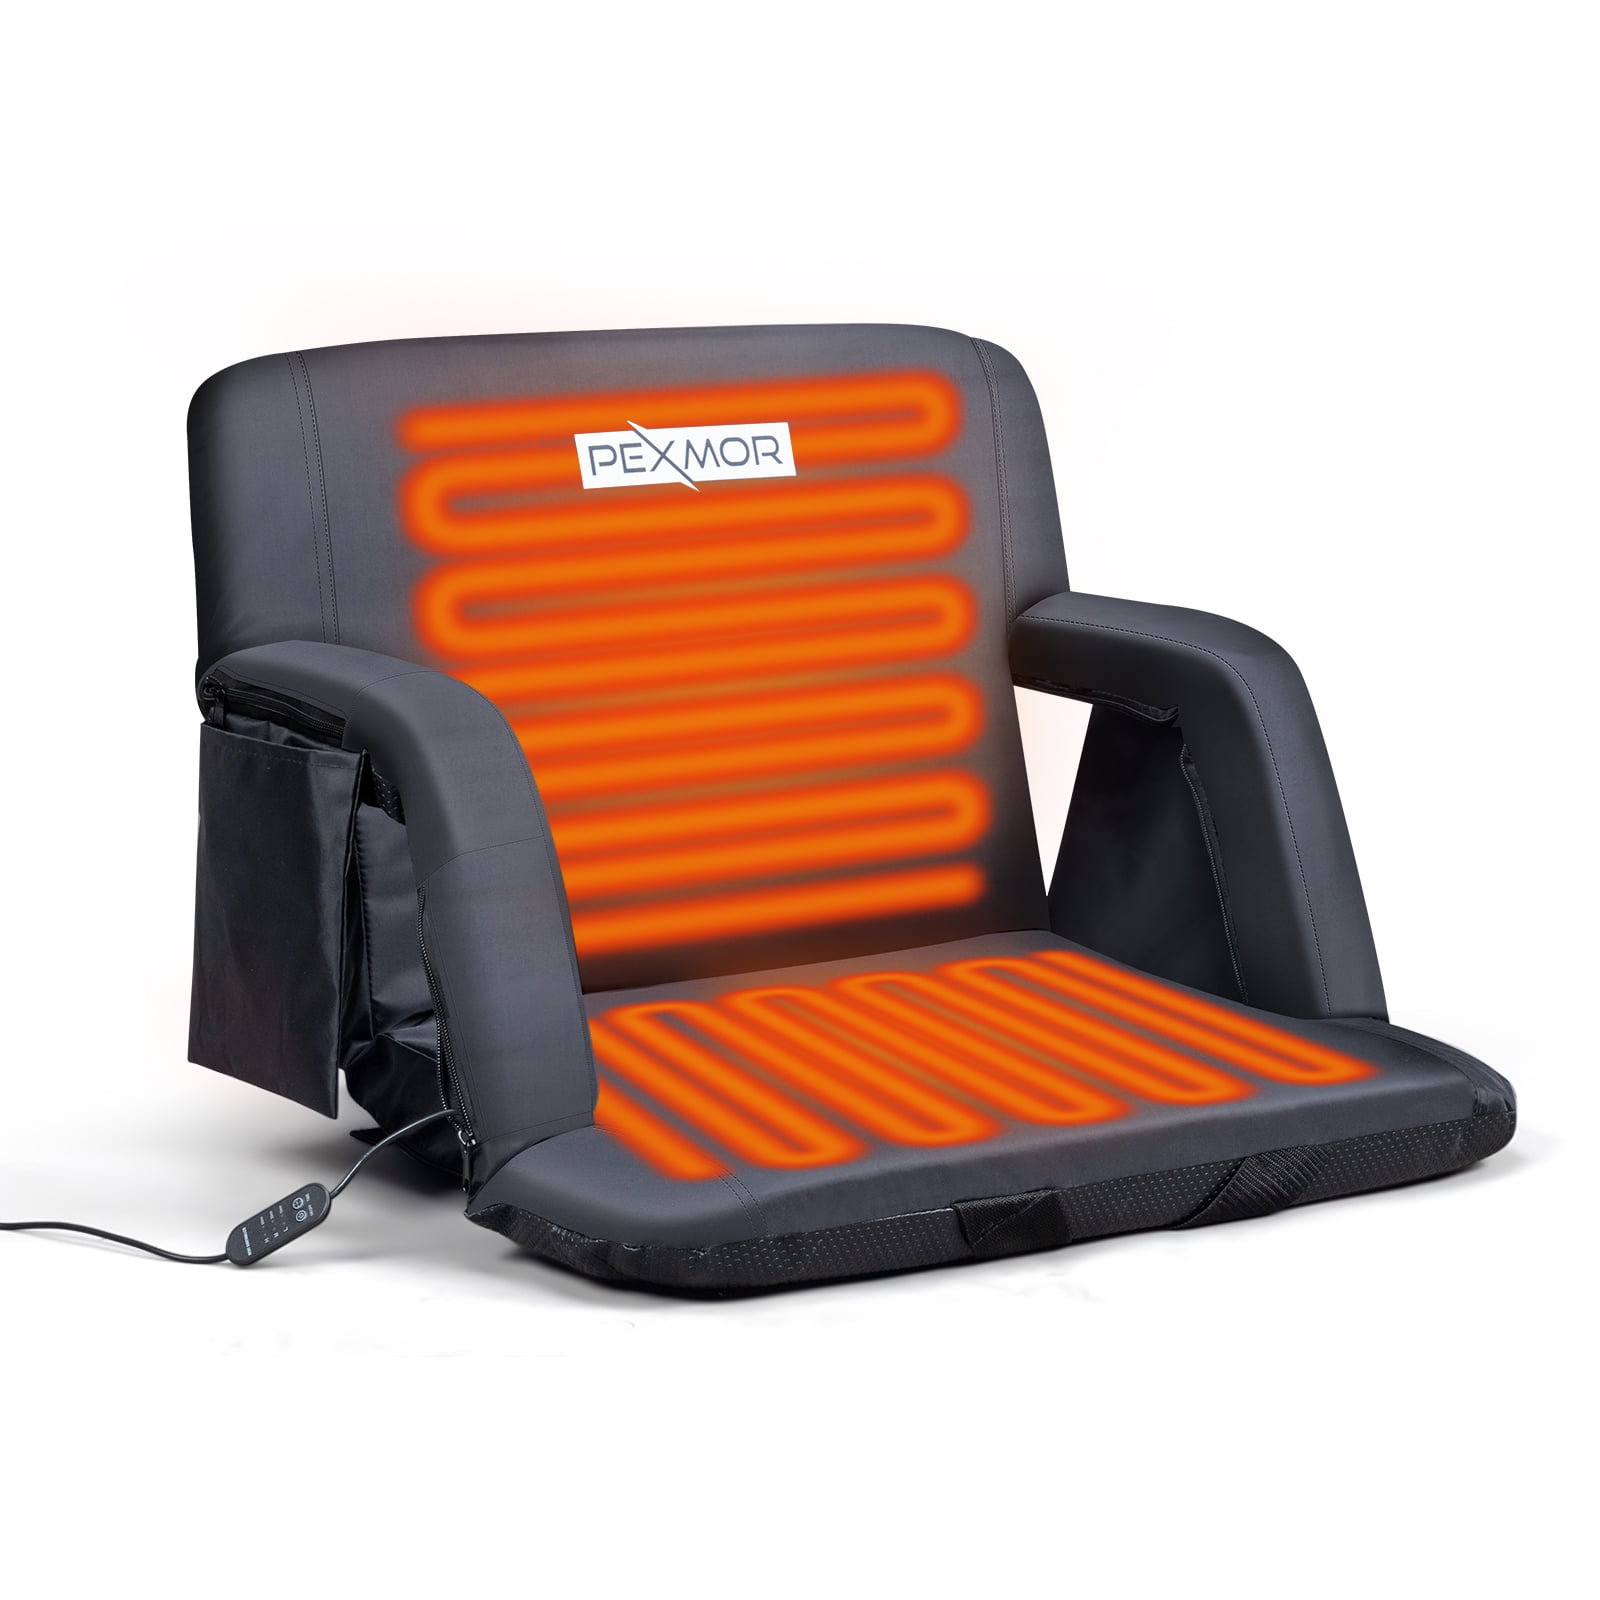 HOPERAN Heated Stadium SEATS for Bleachers with Back Support and Wide Cushion, Extra Portable Bleacher Seat Foldable Stadium Chair, USB 3 Levels of